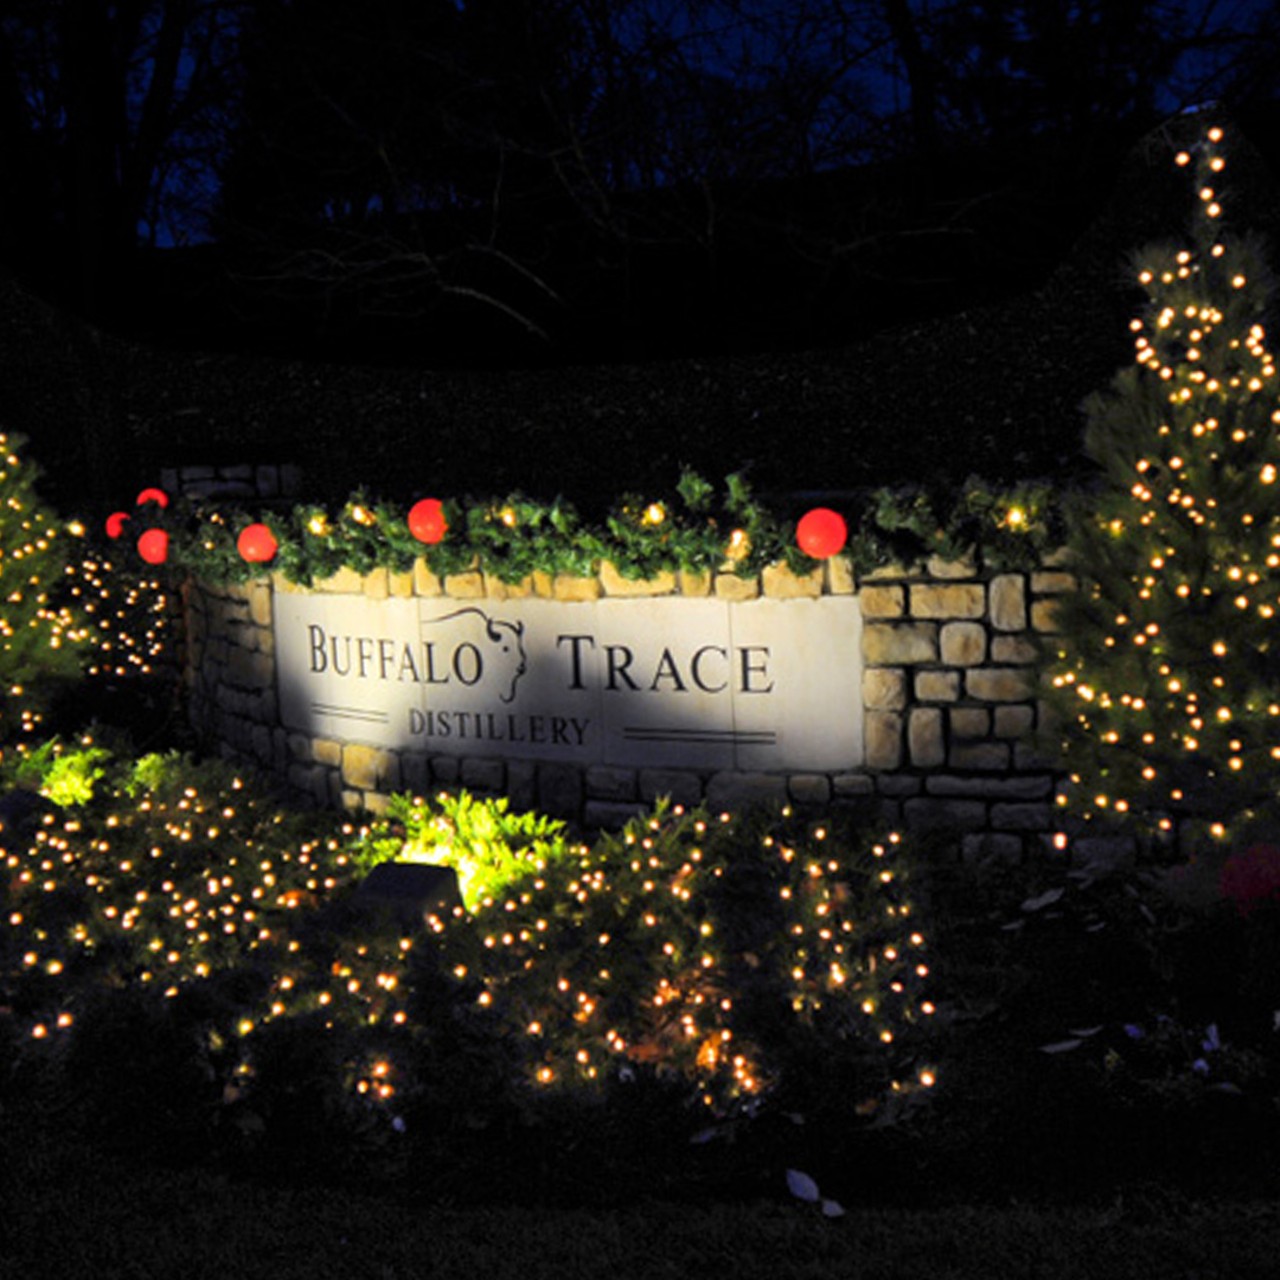  Holiday Lights at the Distillery 
113 Great Buffalo Trace, Frankfort
Nov. 30-Dec. 25, 5:30-8:30 p.m.
Buffalo Trace isn't just a distillery; it's also the site of a free drive-through display of Christmas lights.
Photo via facebook.com/buffalotracedistillery